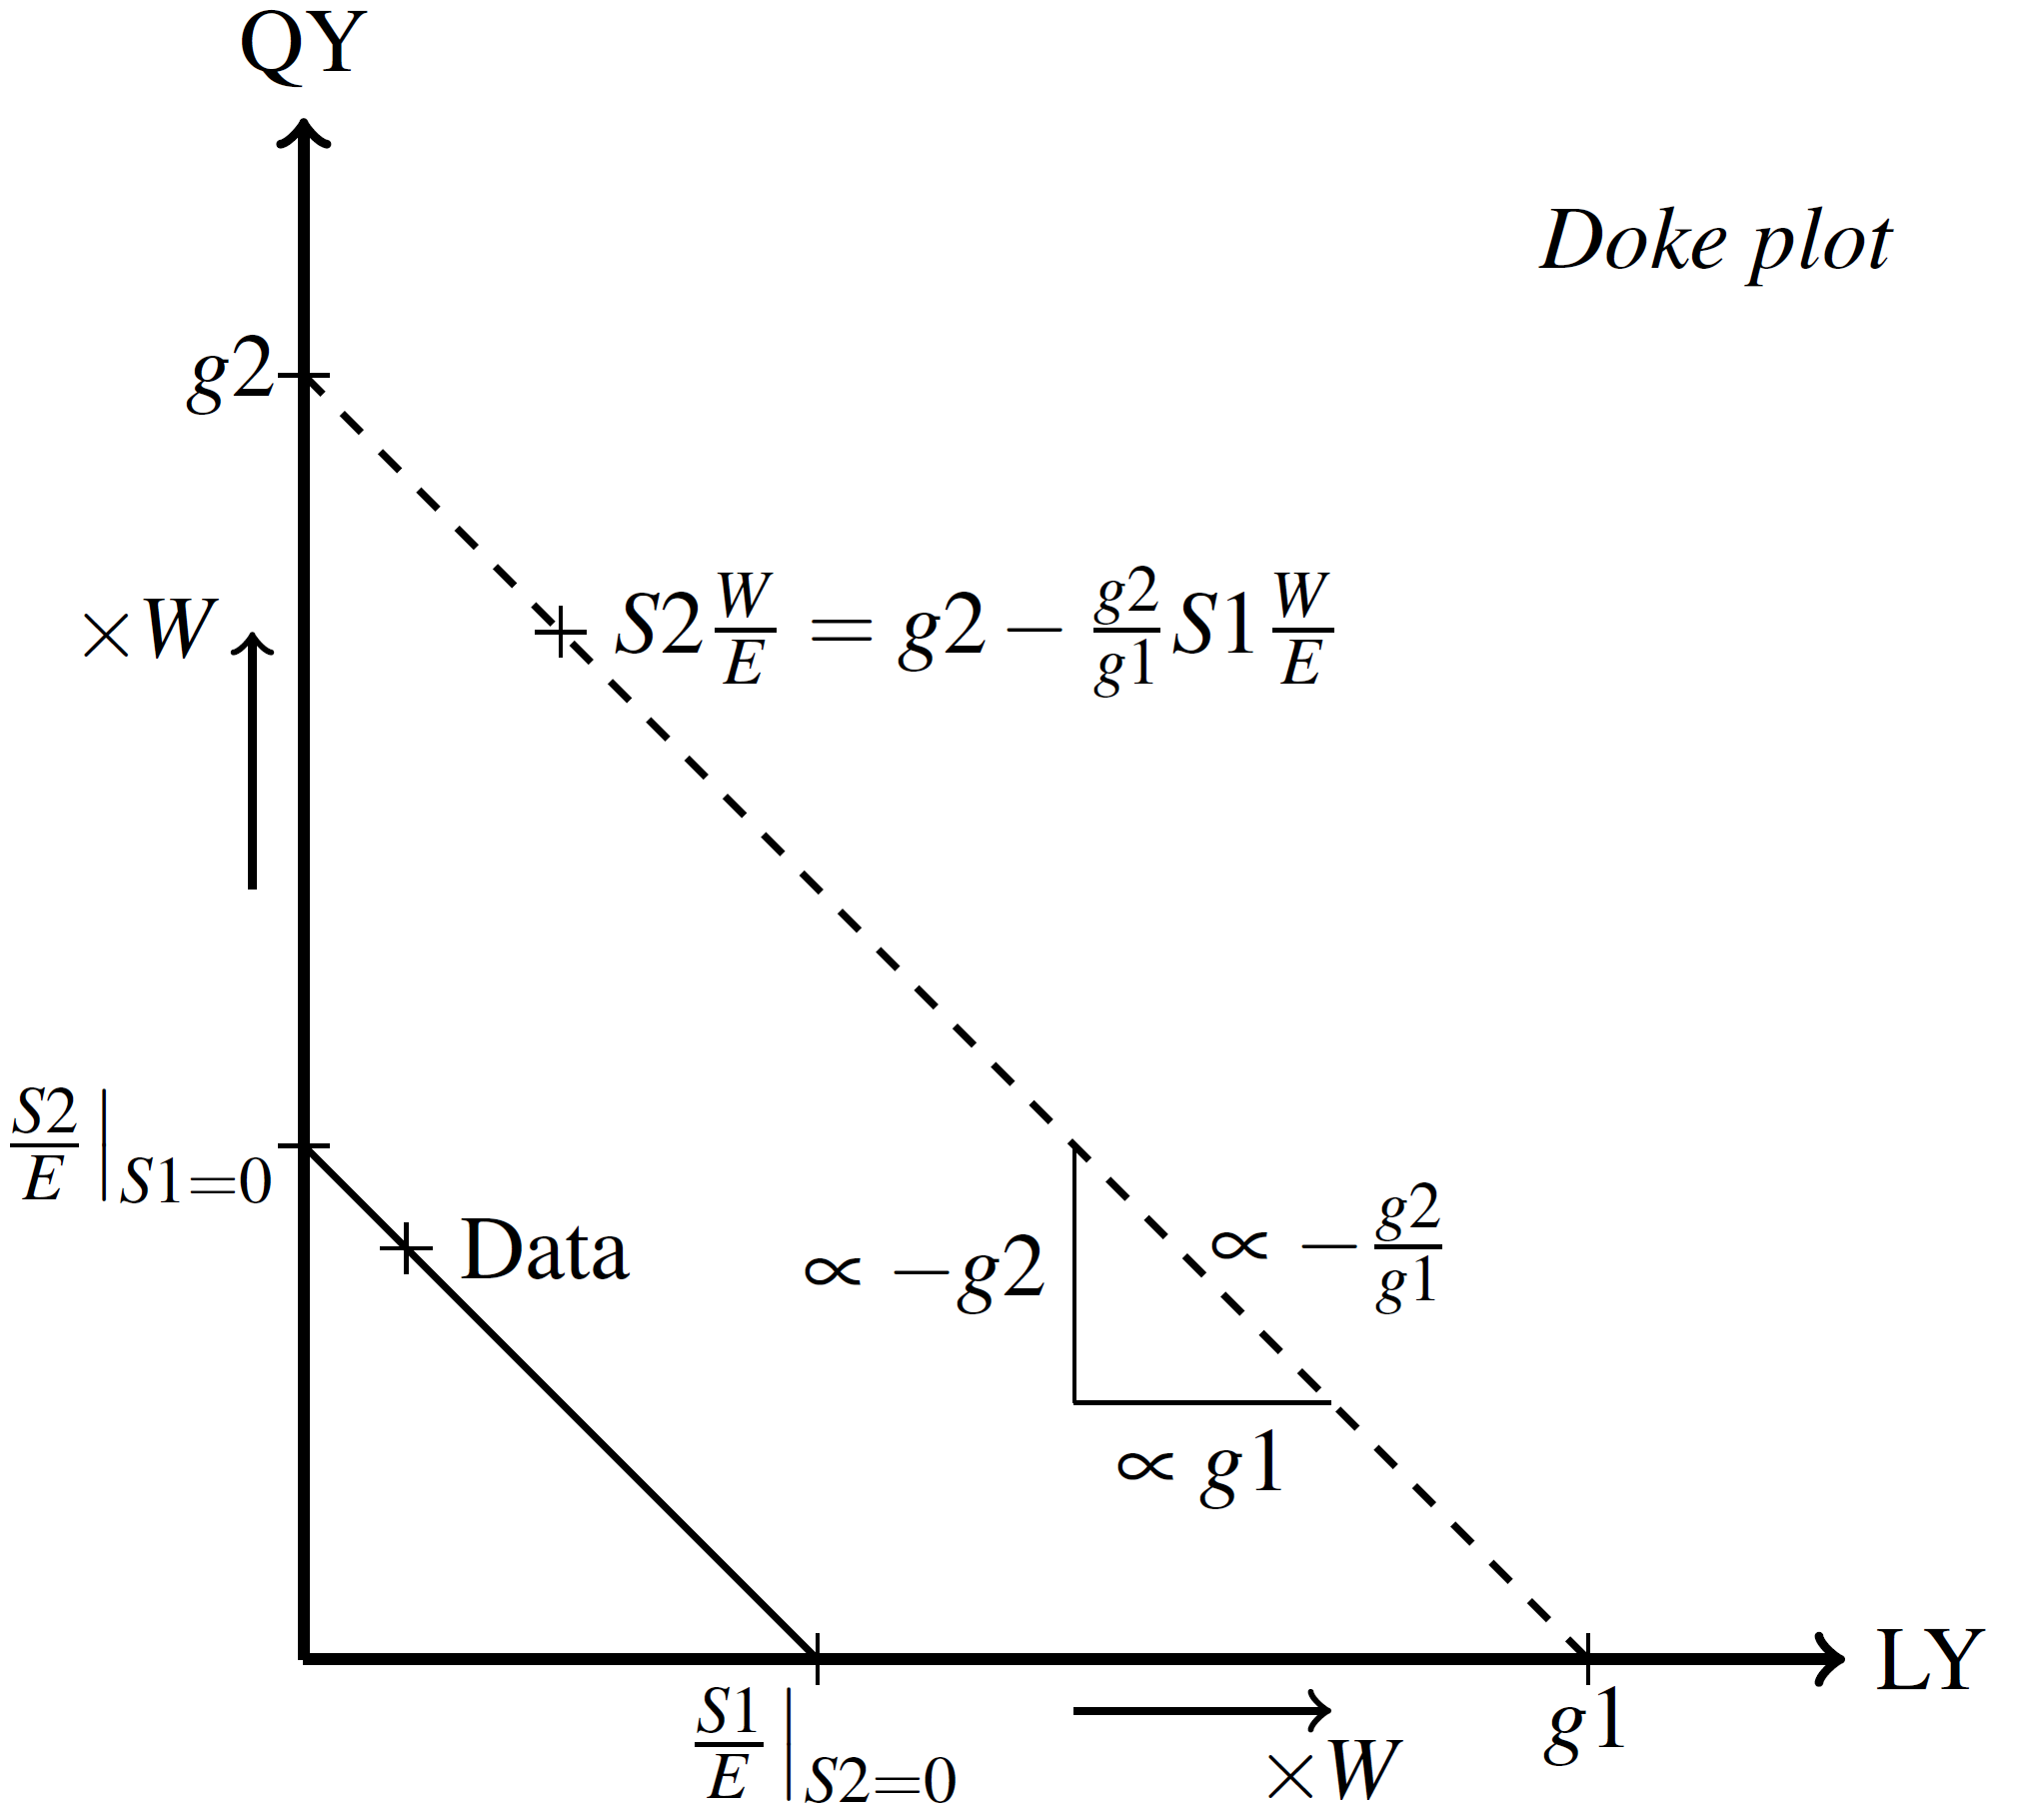 Schematic of the Doke plot